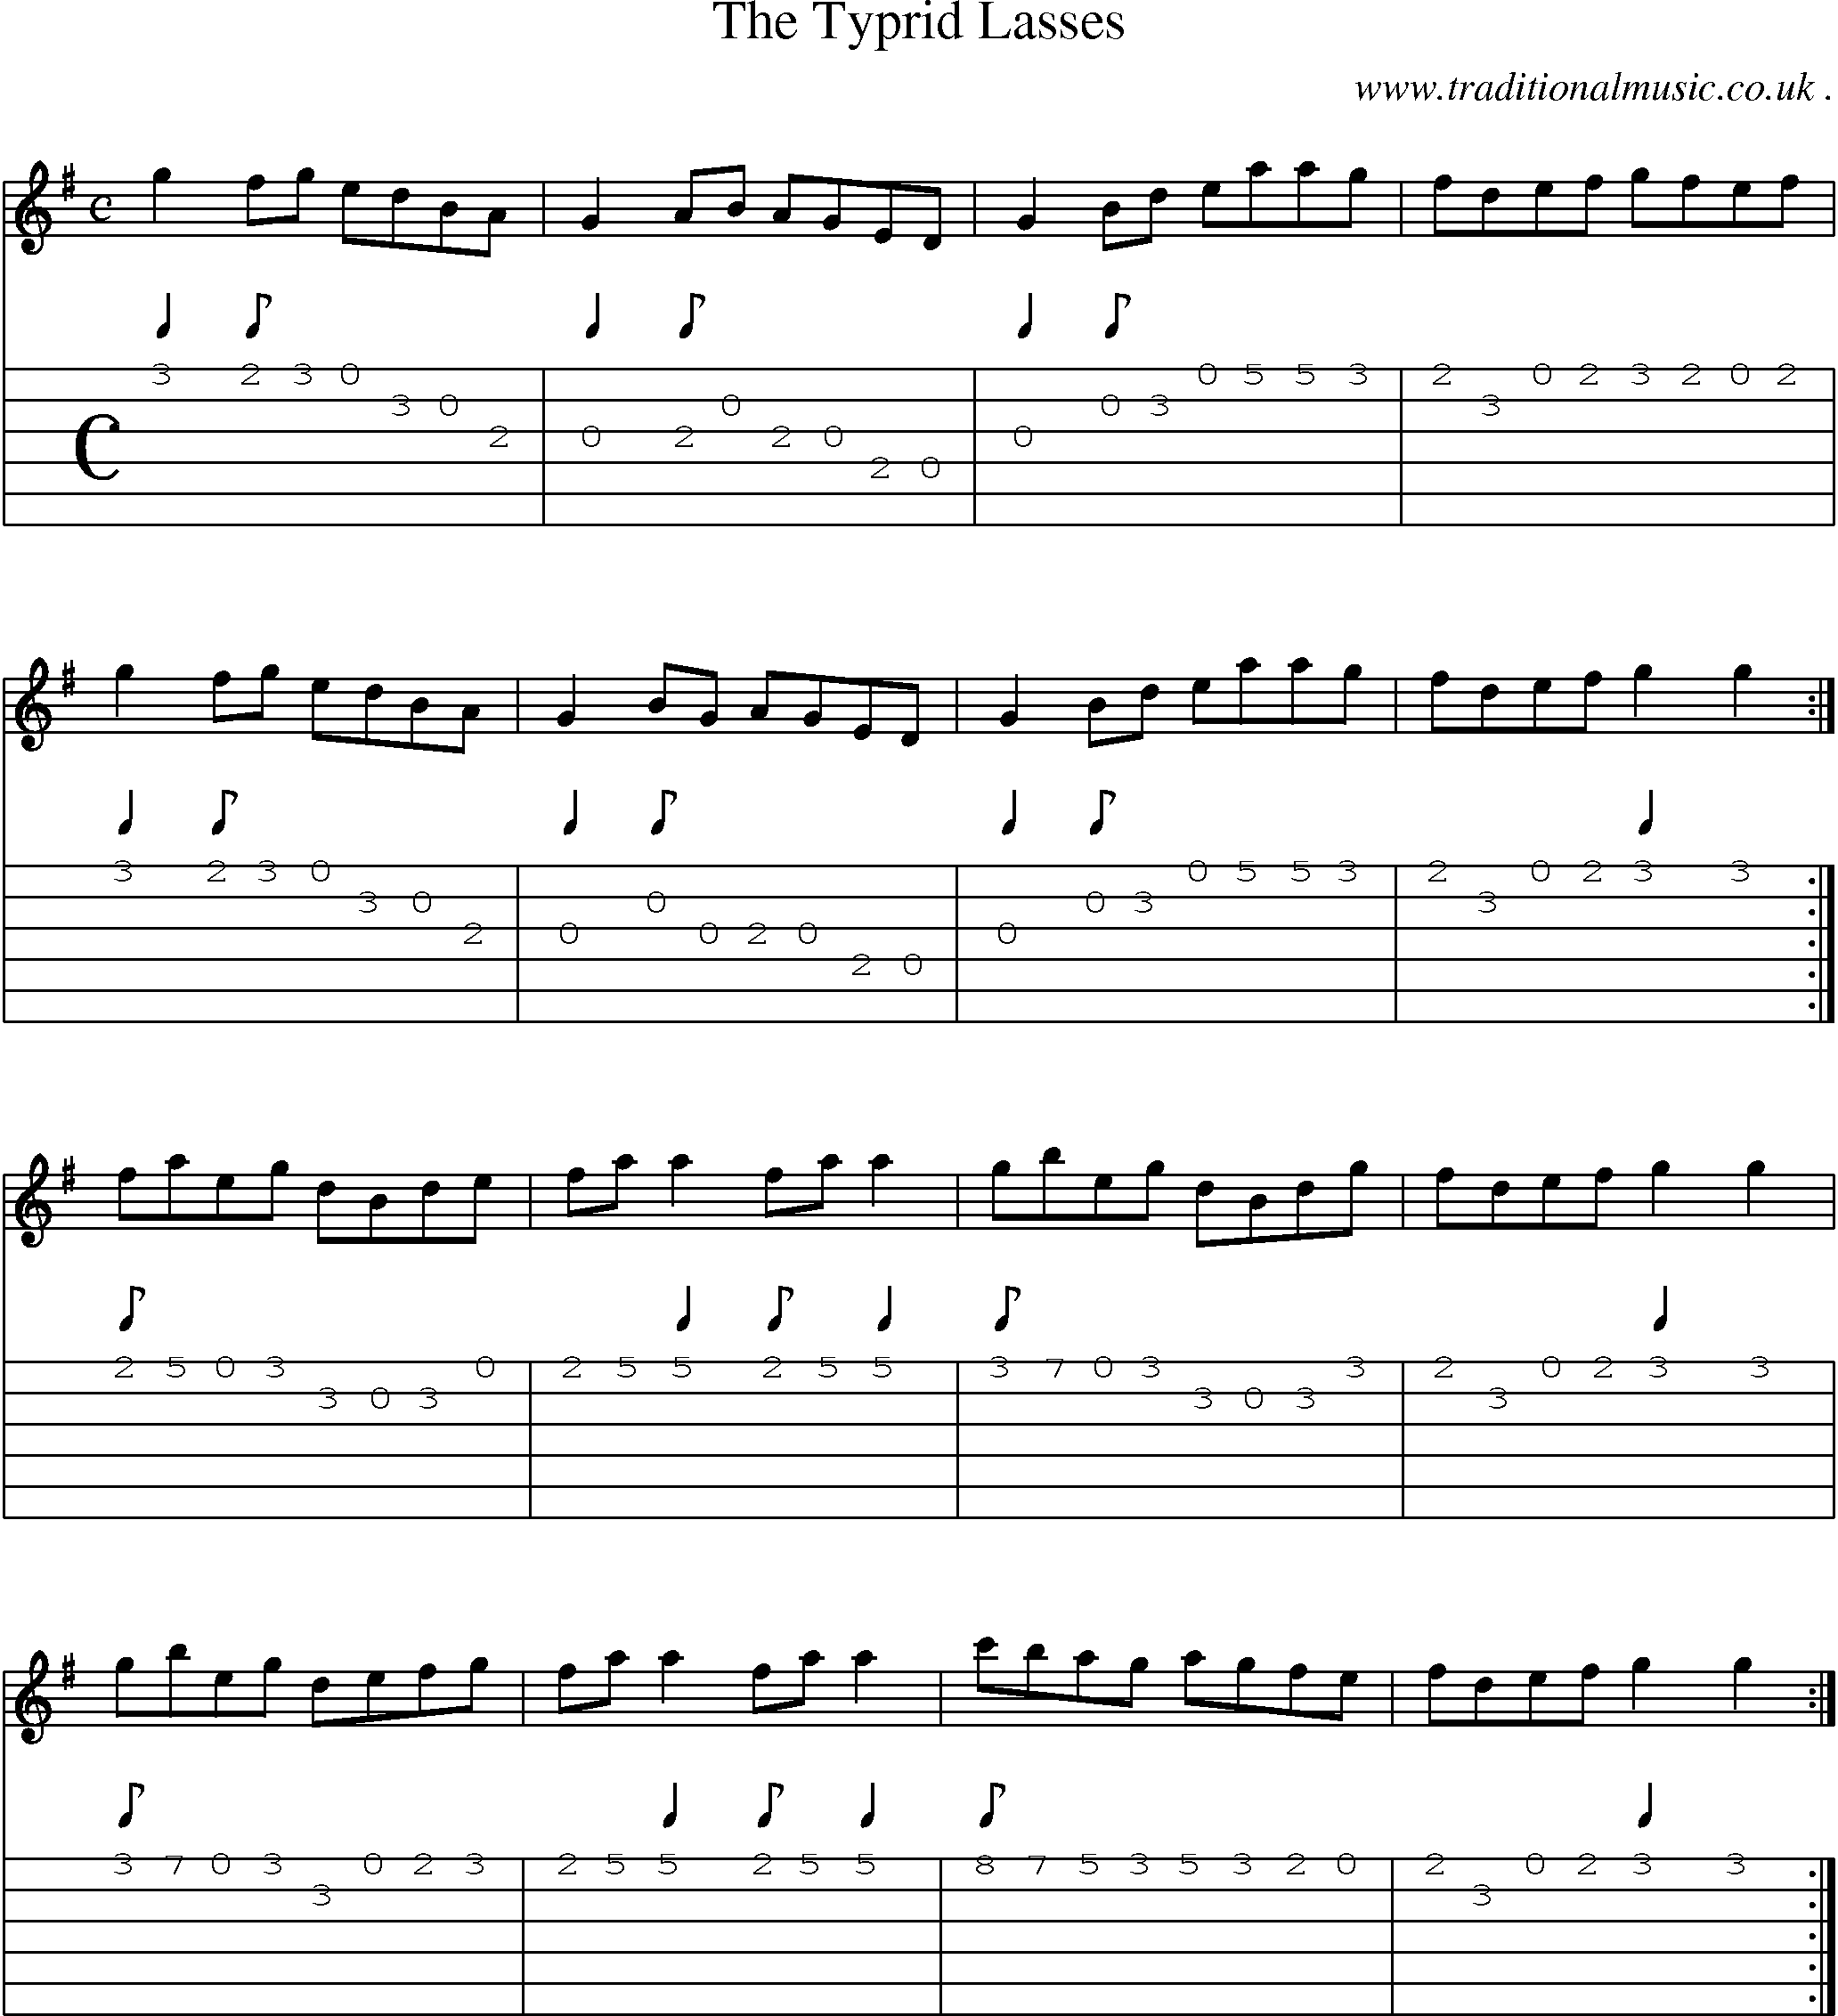 Sheet-Music and Guitar Tabs for The Typrid Lasses